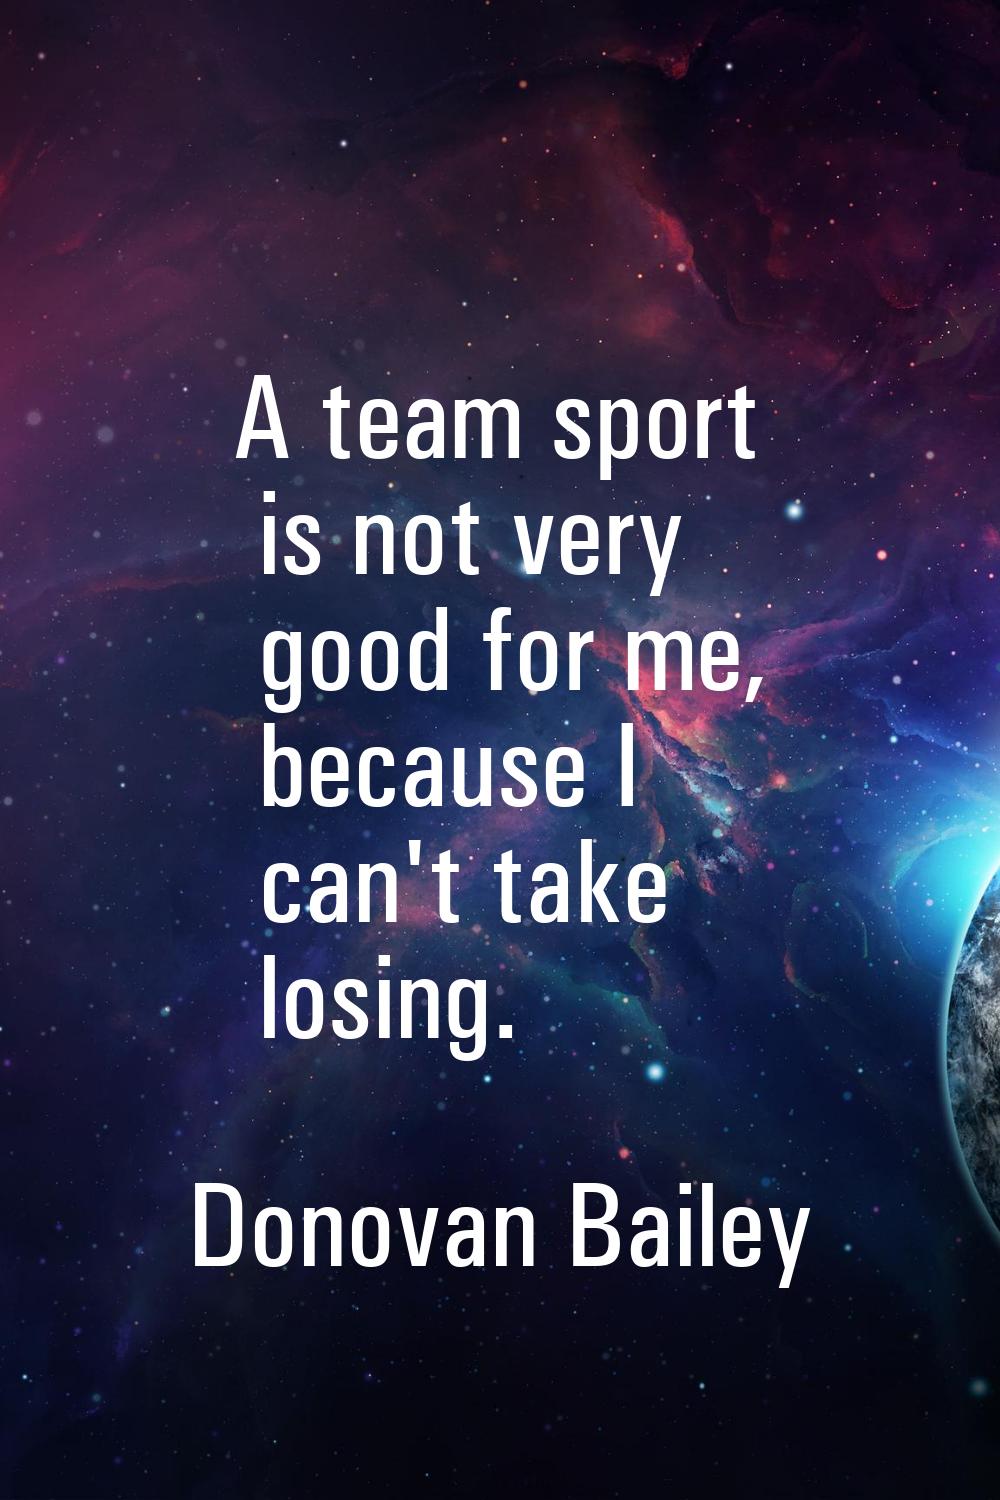 A team sport is not very good for me, because I can't take losing.